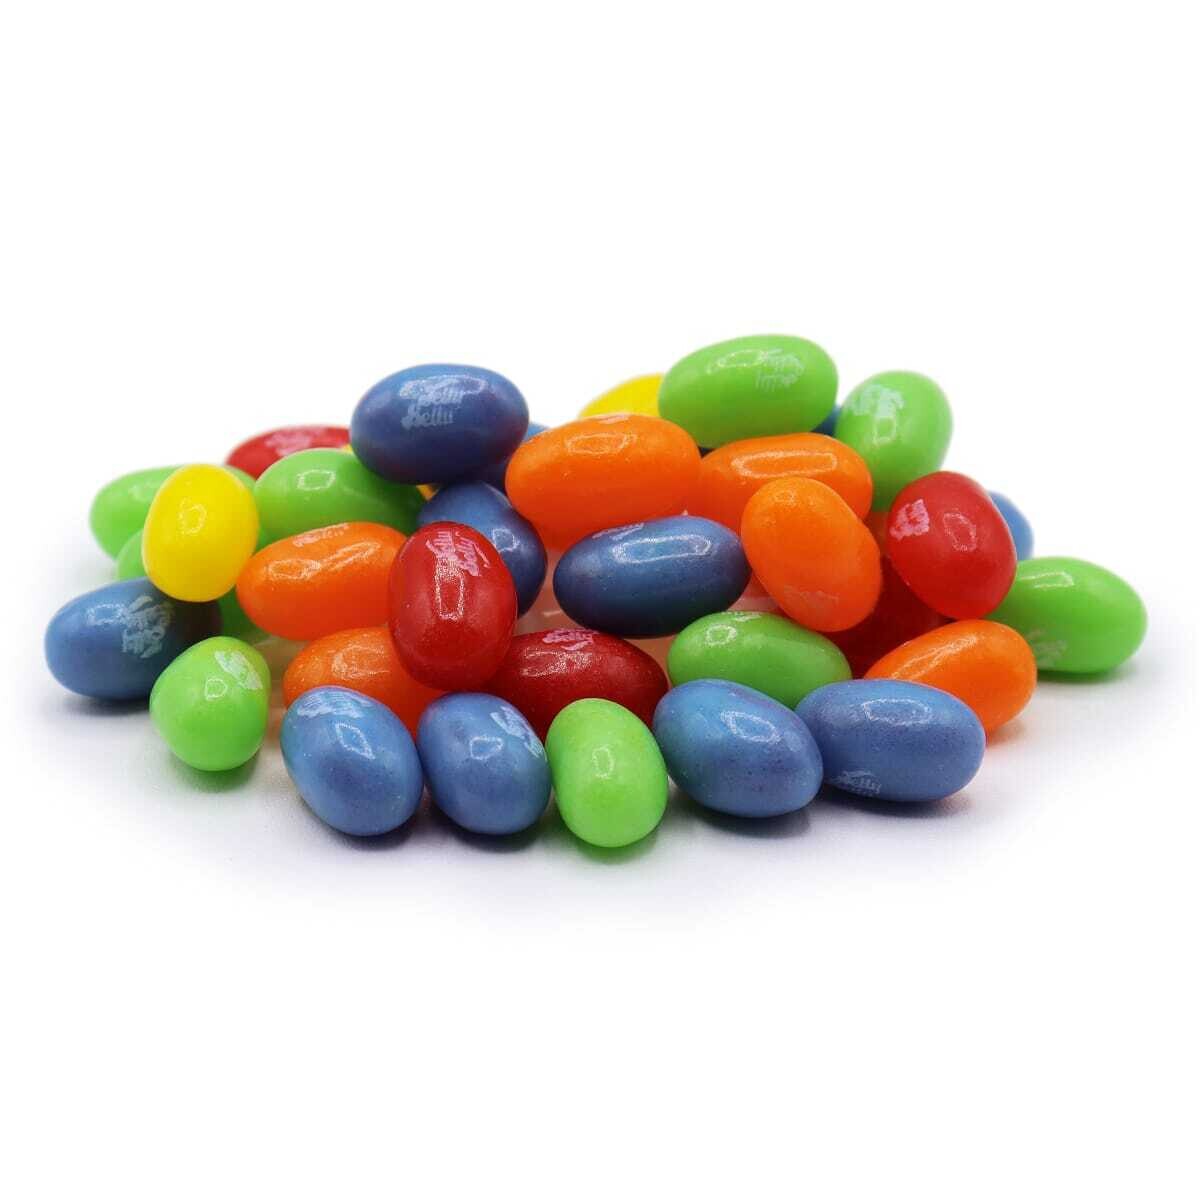 SOURS! - Jelly Belly Jelly Beans